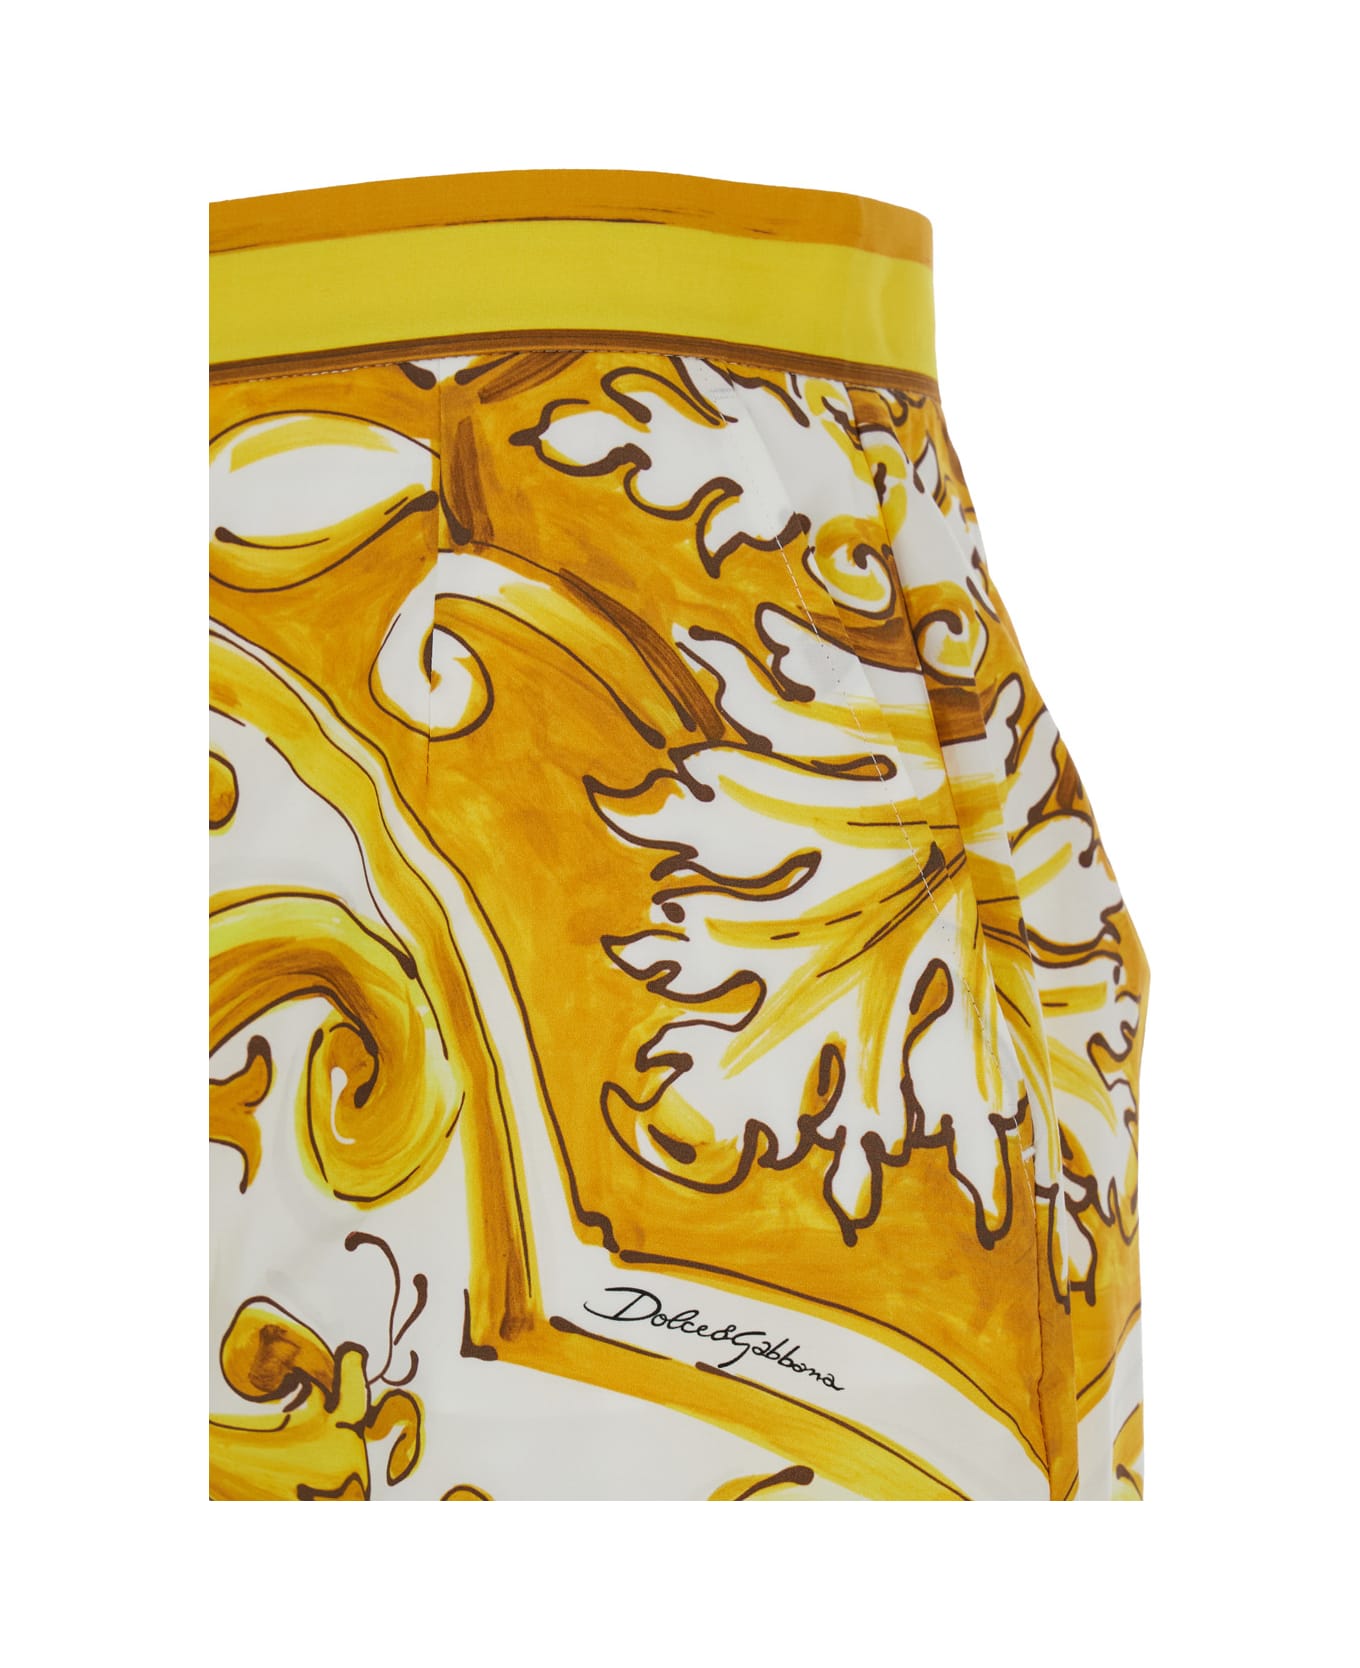 Dolce & Gabbana Yellow And White Short With Majolica Print In Cotton Woman - Yellow